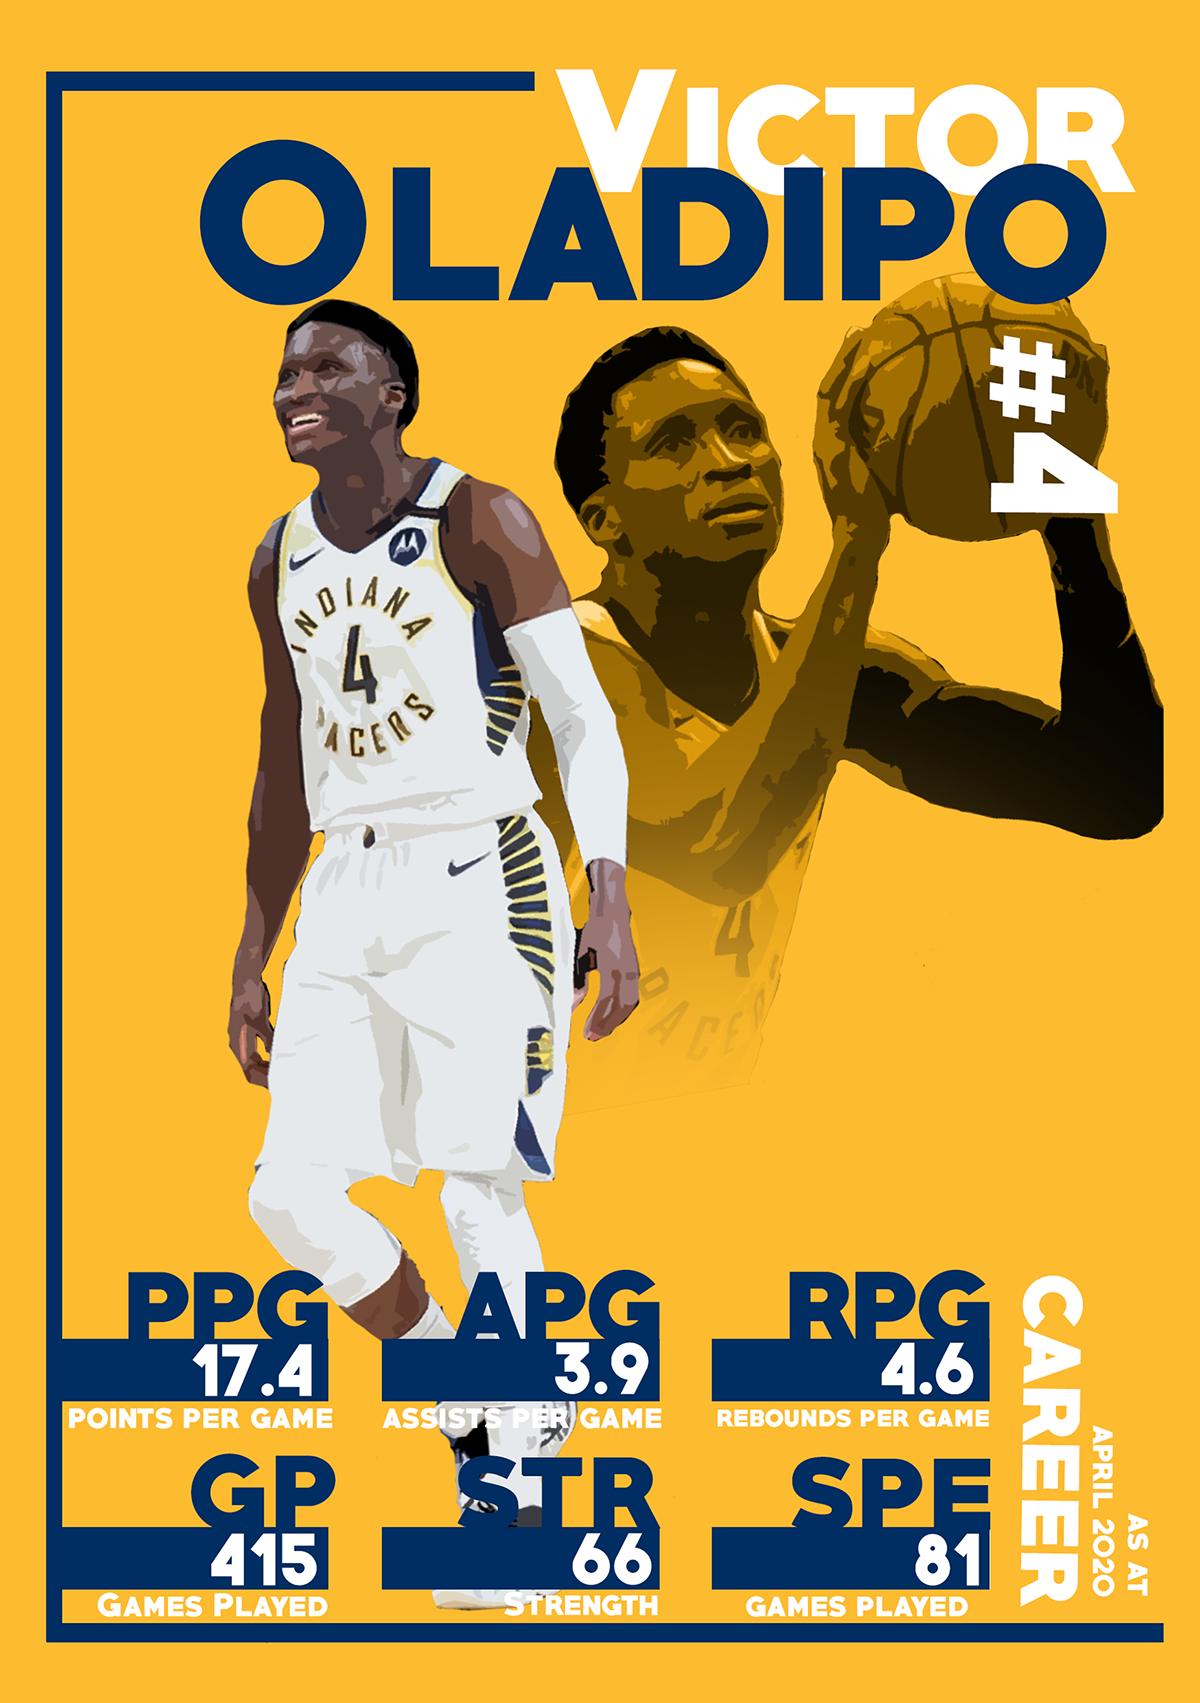 basketball design graphic indiana NBA Oladipo Pacers shootout stat victor